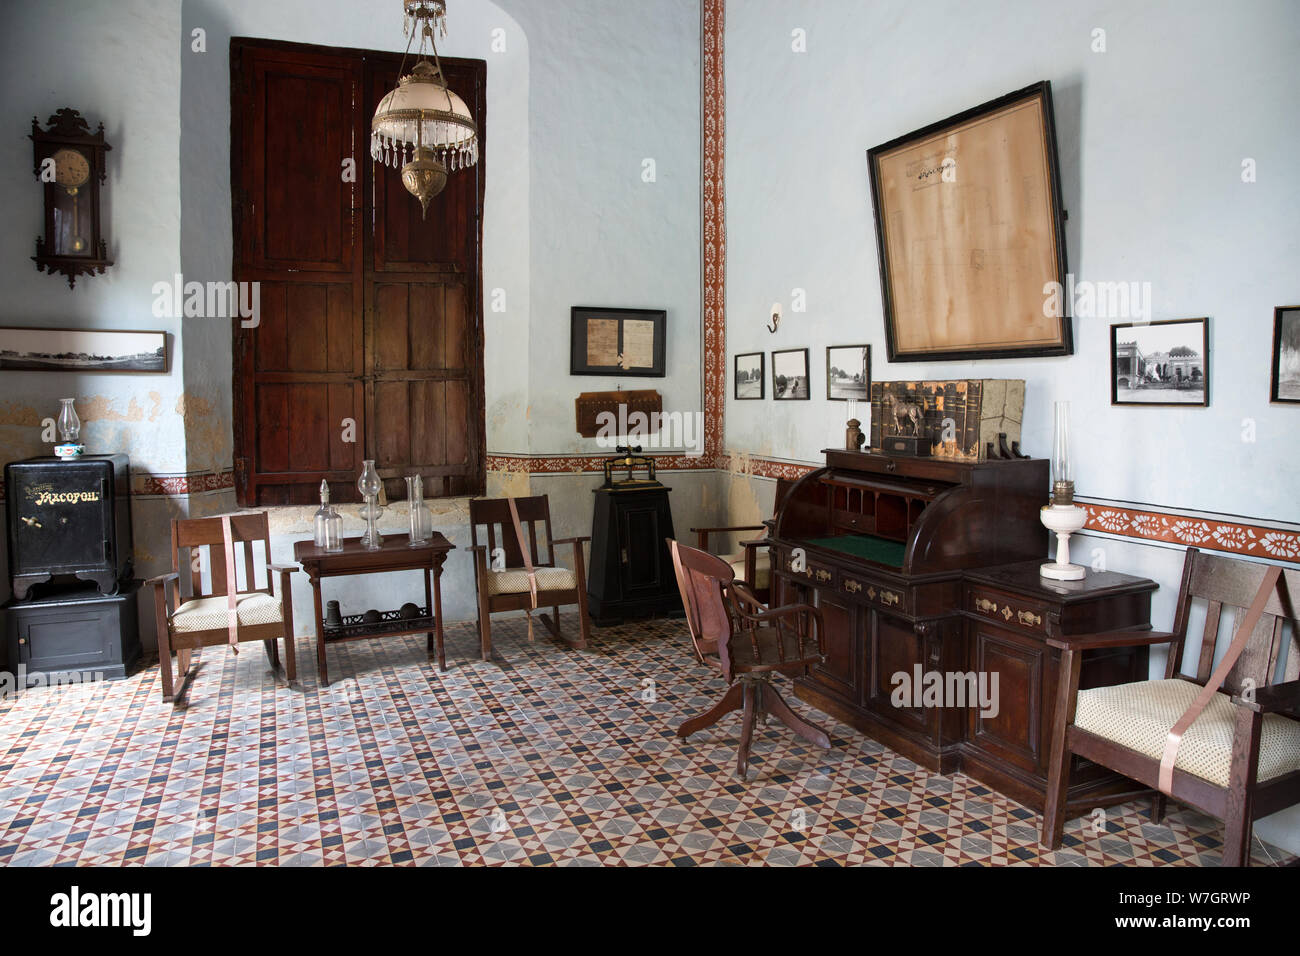 The office with colonial antique furniture in the main house of Hacienda Yaxcopoil in the Uman Municipality, state of Yucatan, Mexico on July 22, 2019. Here there is a collection of books, maps, documents and other items of historical note from when this was the administration center of the hacienda. Hacienda Yaxcopoil dates back to the 17th century and was once considered one of the most important rural estates in the Yucatan, spreading across 22,000 acres. It operated first as a cattle ranch and later as a henequen plantation during the golden age of the 'agave sisal'. Over time, due to cont Stock Photo